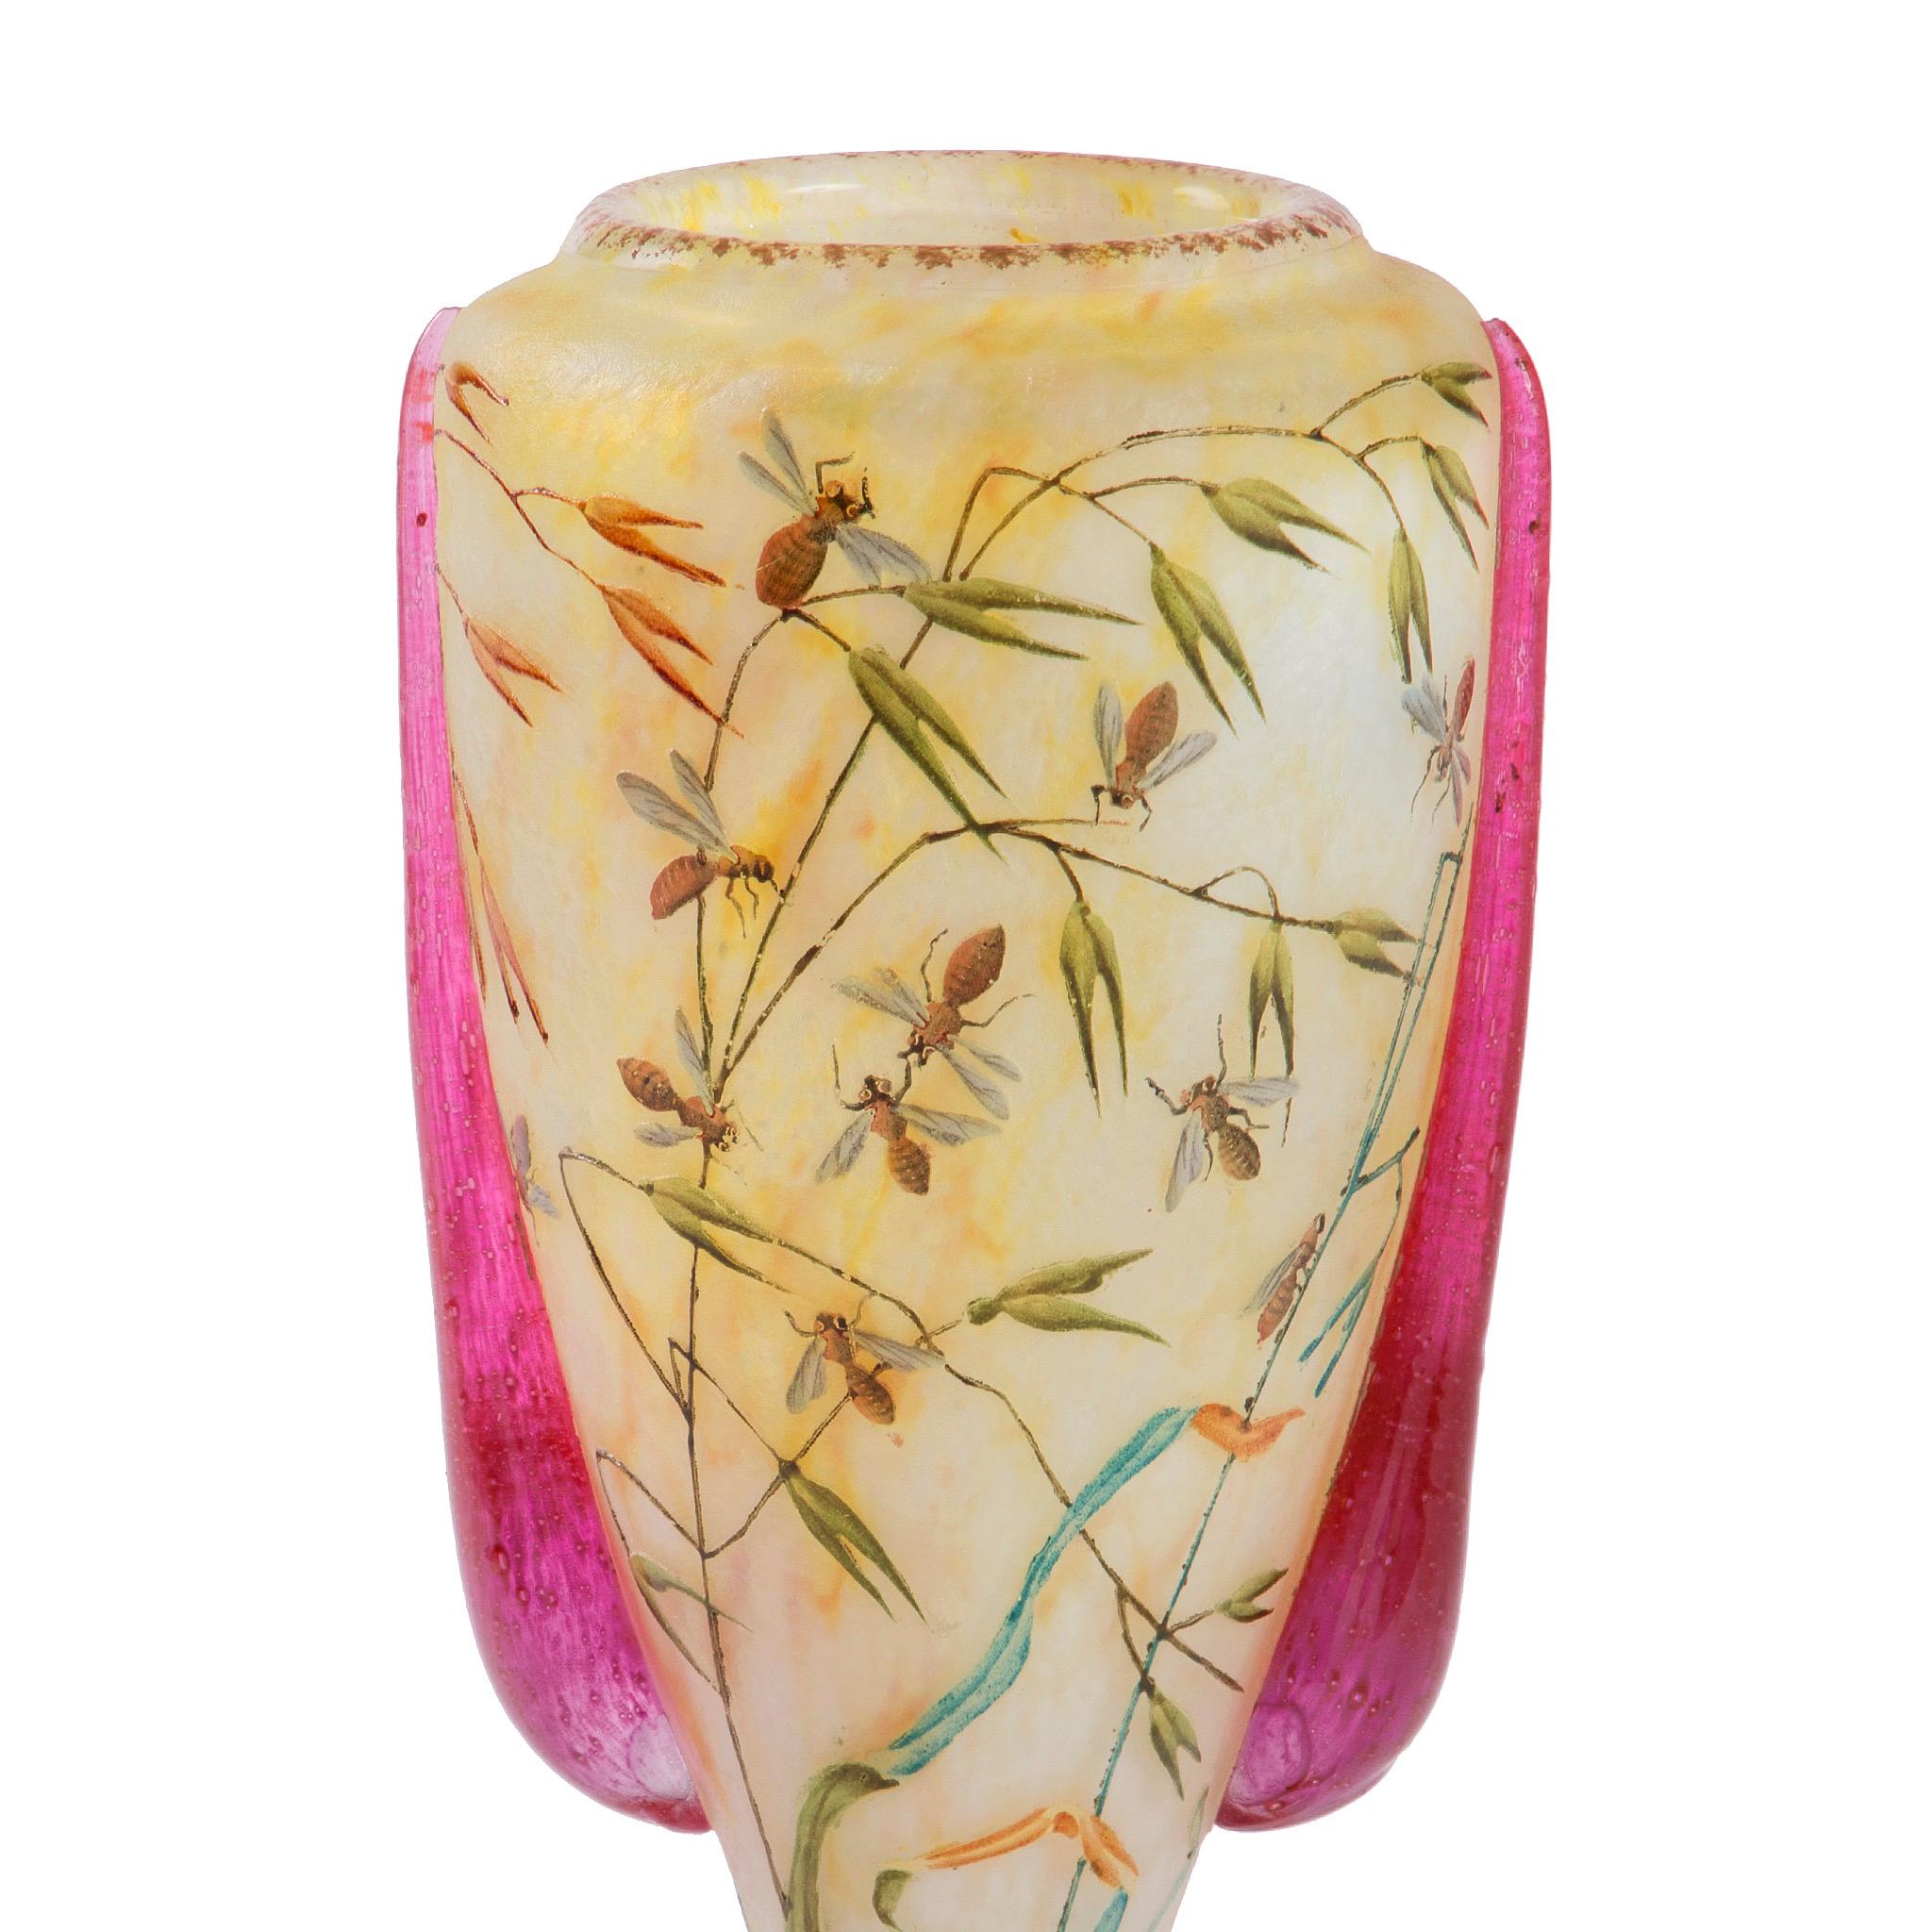 This French Art Nouveau Glass Vase by Daum features ruby-toned handles and bees buzzing amongst the variously colored foliage featured on the vessel. The vase utilizes the famous Daum Studio’s technique of blowing clear glass around an inner layer